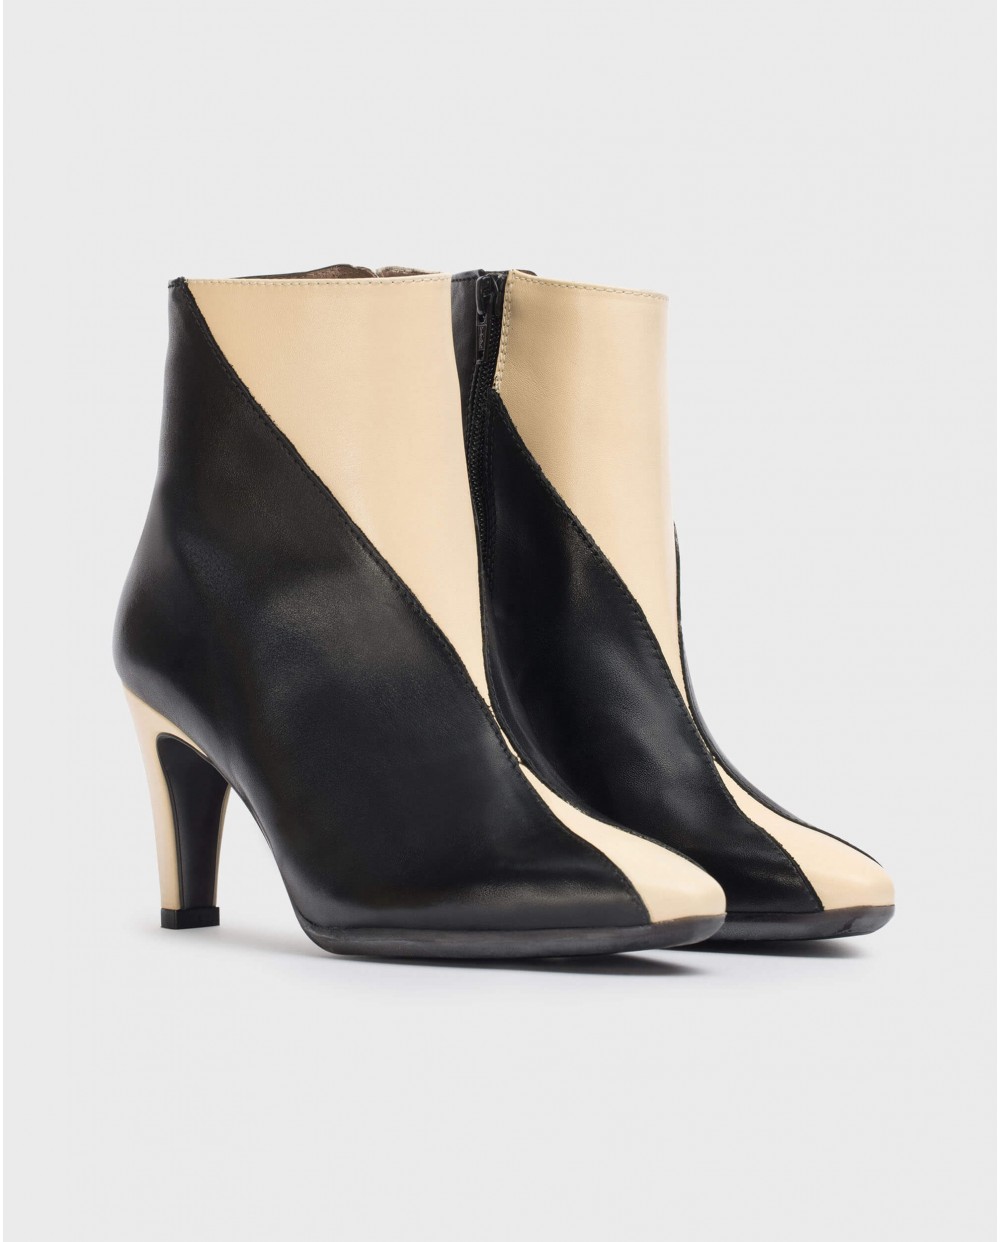 Bicolor Wind ankle boot